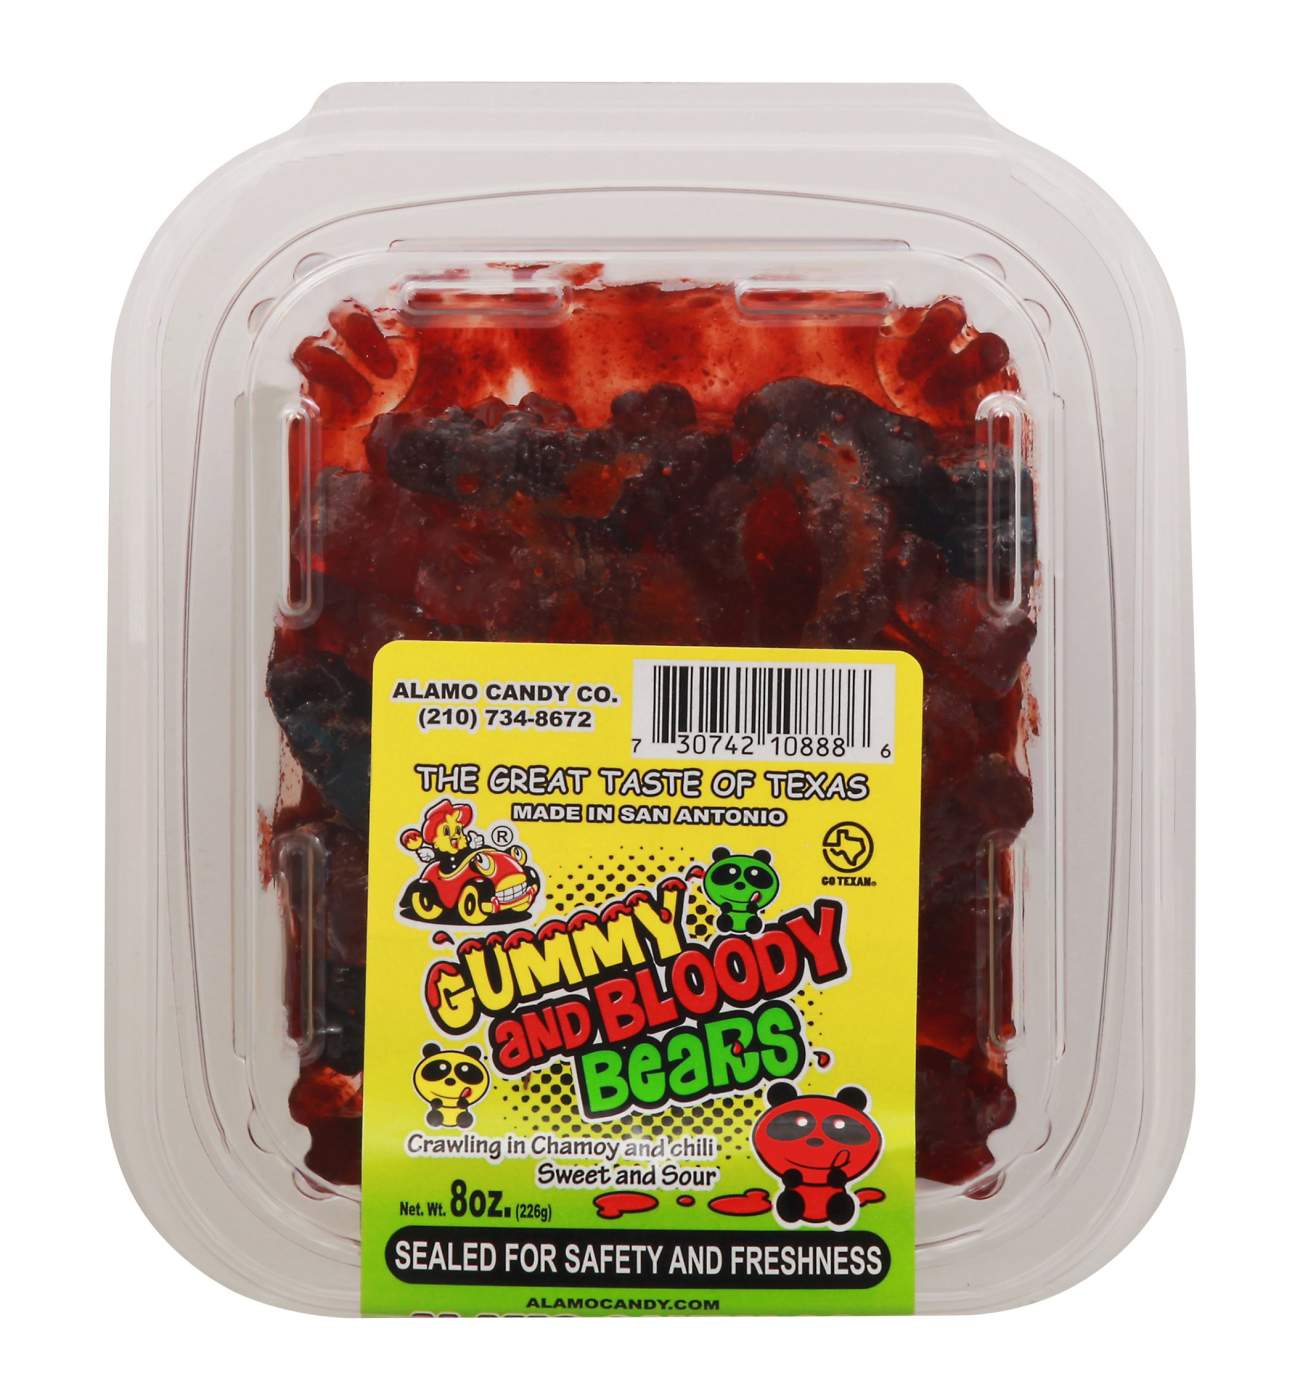 Alamo Candy Gummy and Bloody Gummy Bears; image 1 of 3